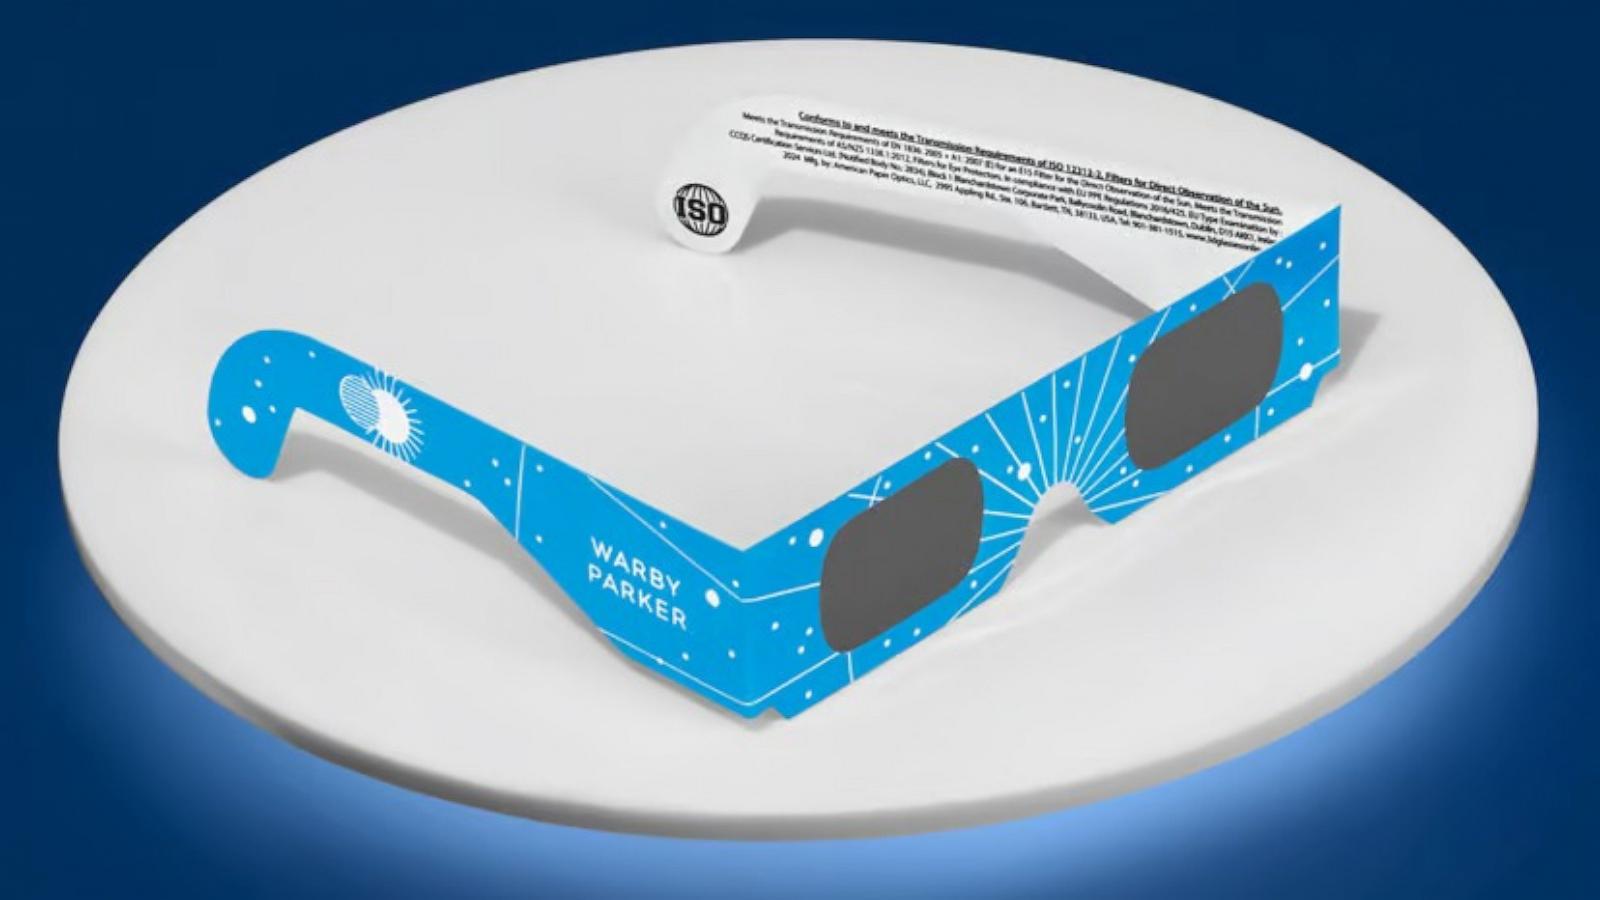 PHOTO: Warby Parker offers free ISO-certified eclipse glasses for April 8 total solar eclipse.